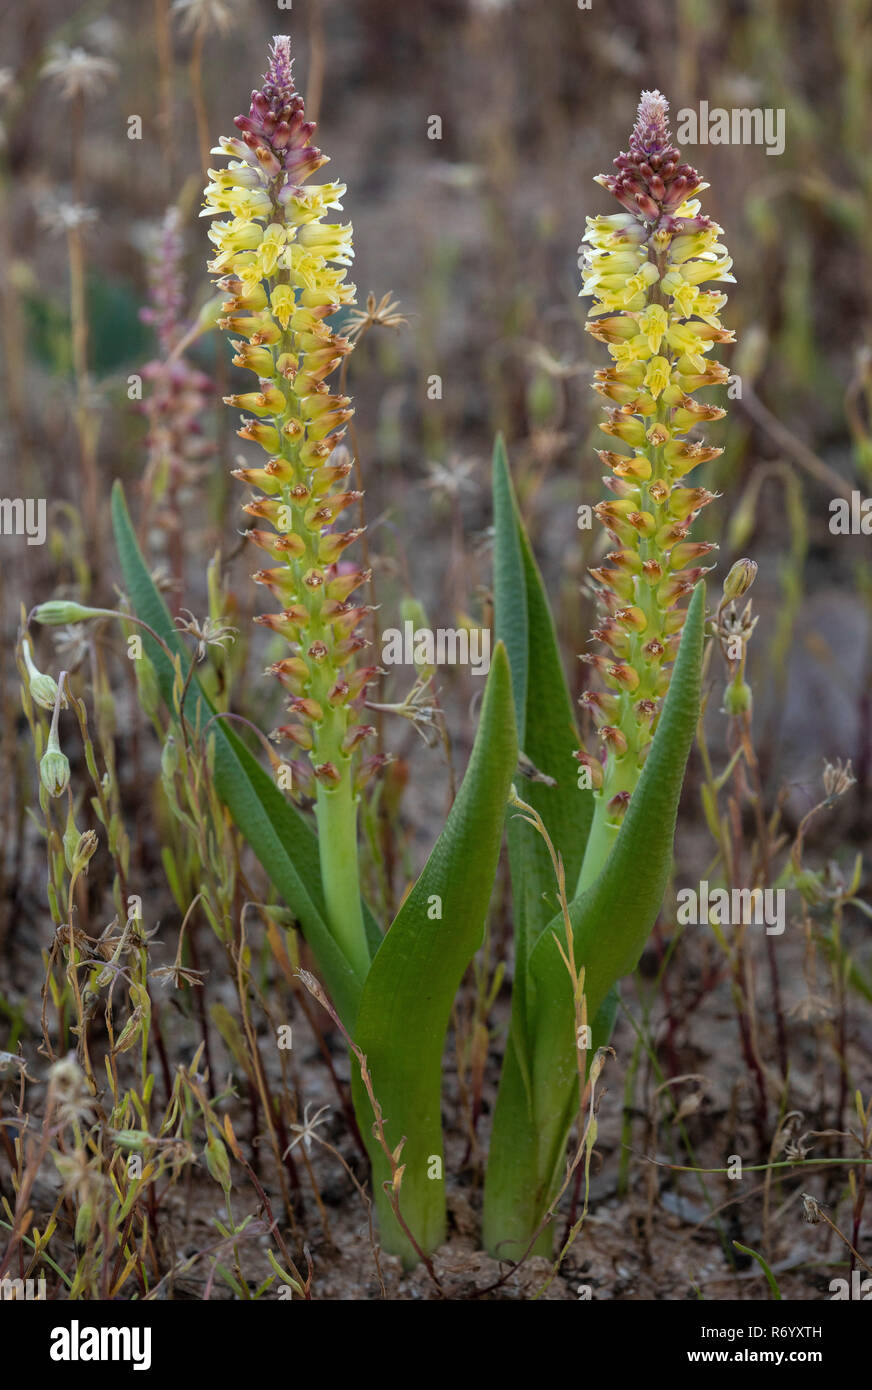 A spring-flowering bulb, bleek viooltjie, Lachenalia pallida, in flower near Clanwilliam,  Western Cape, South Africa. Stock Photo